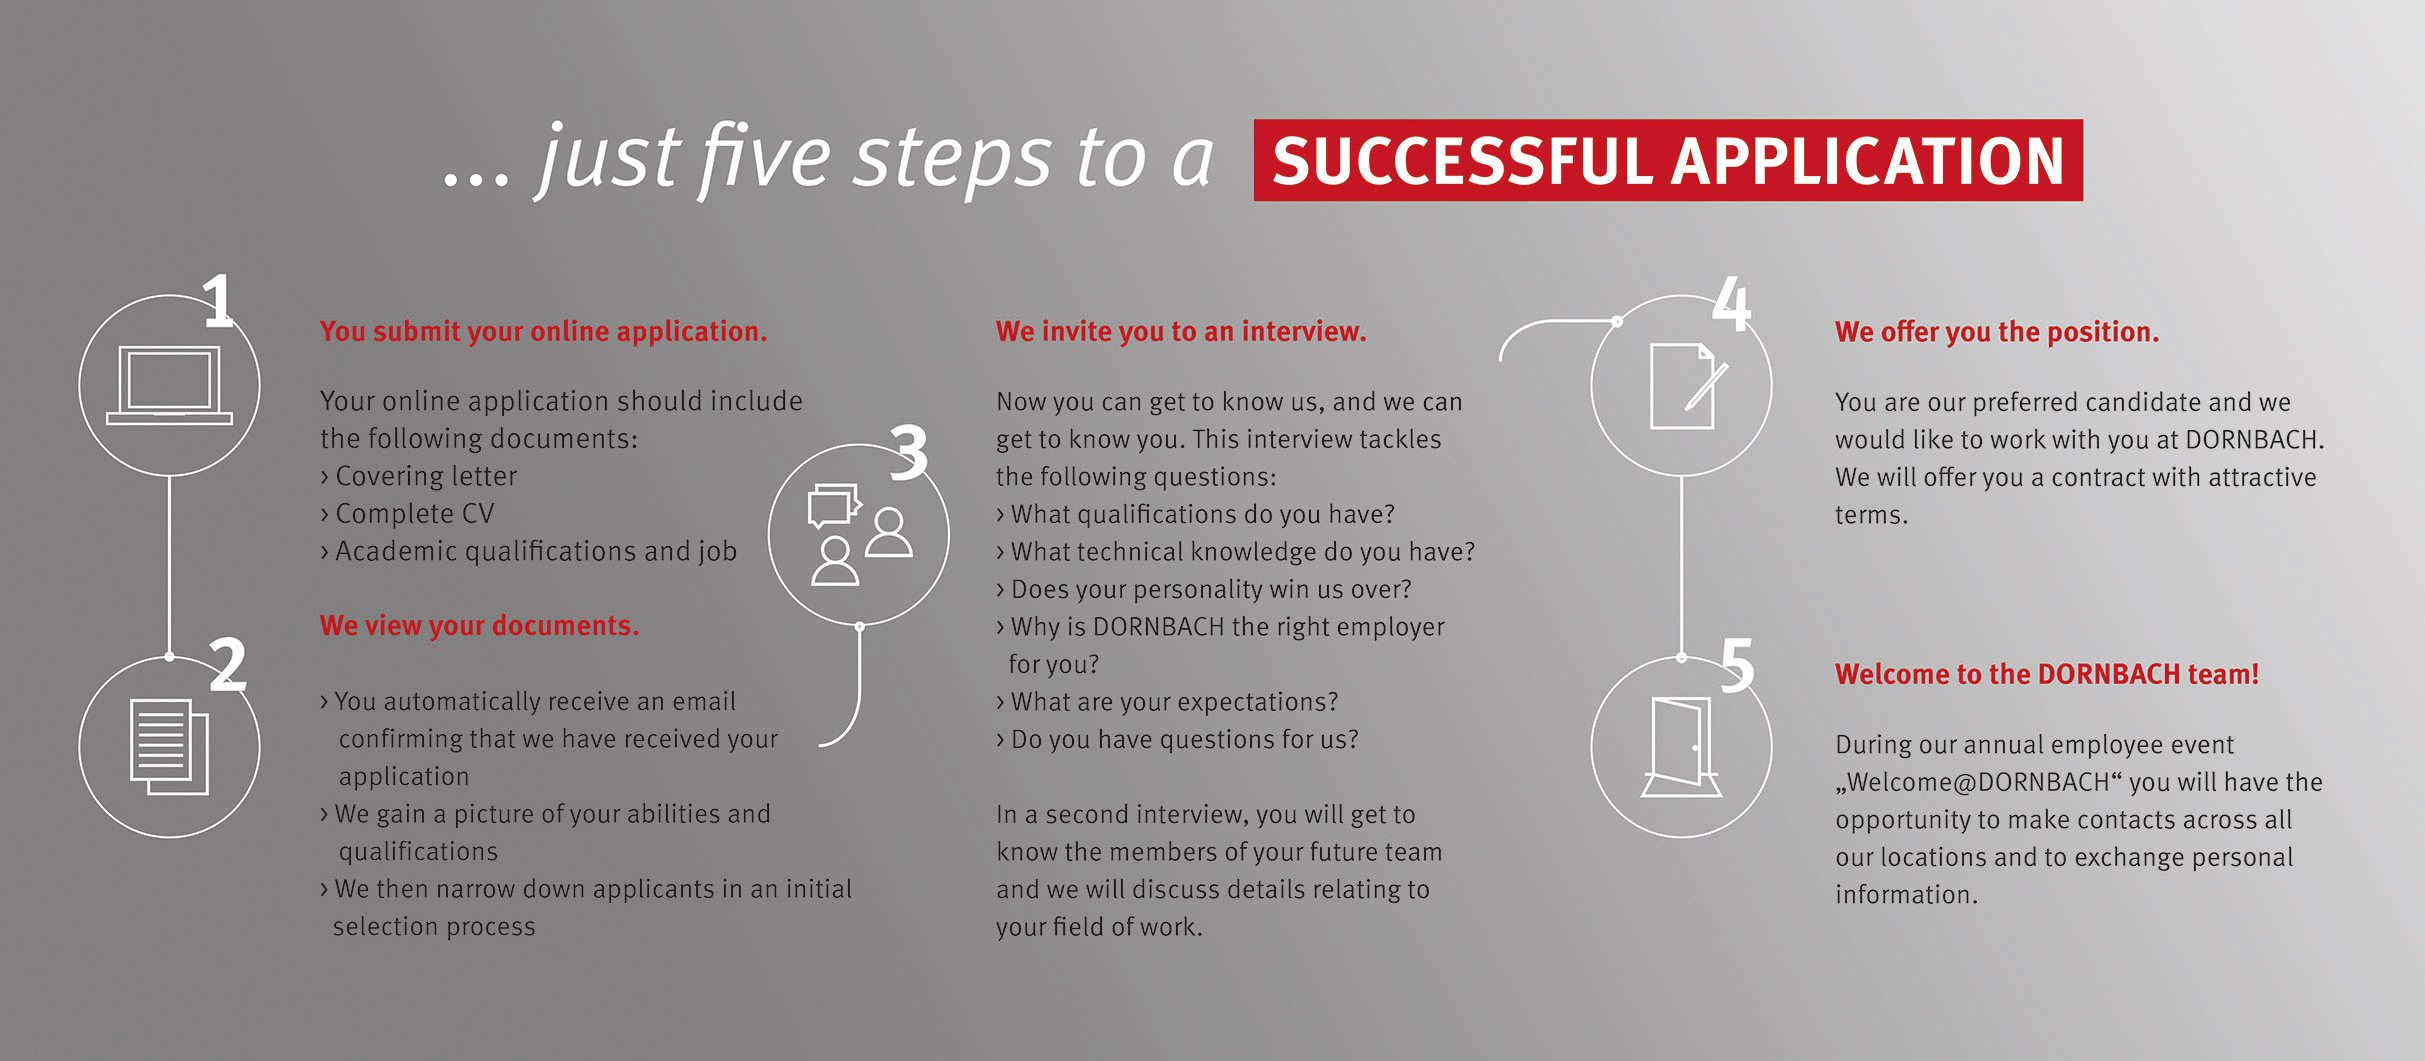 5 steps to a successful application